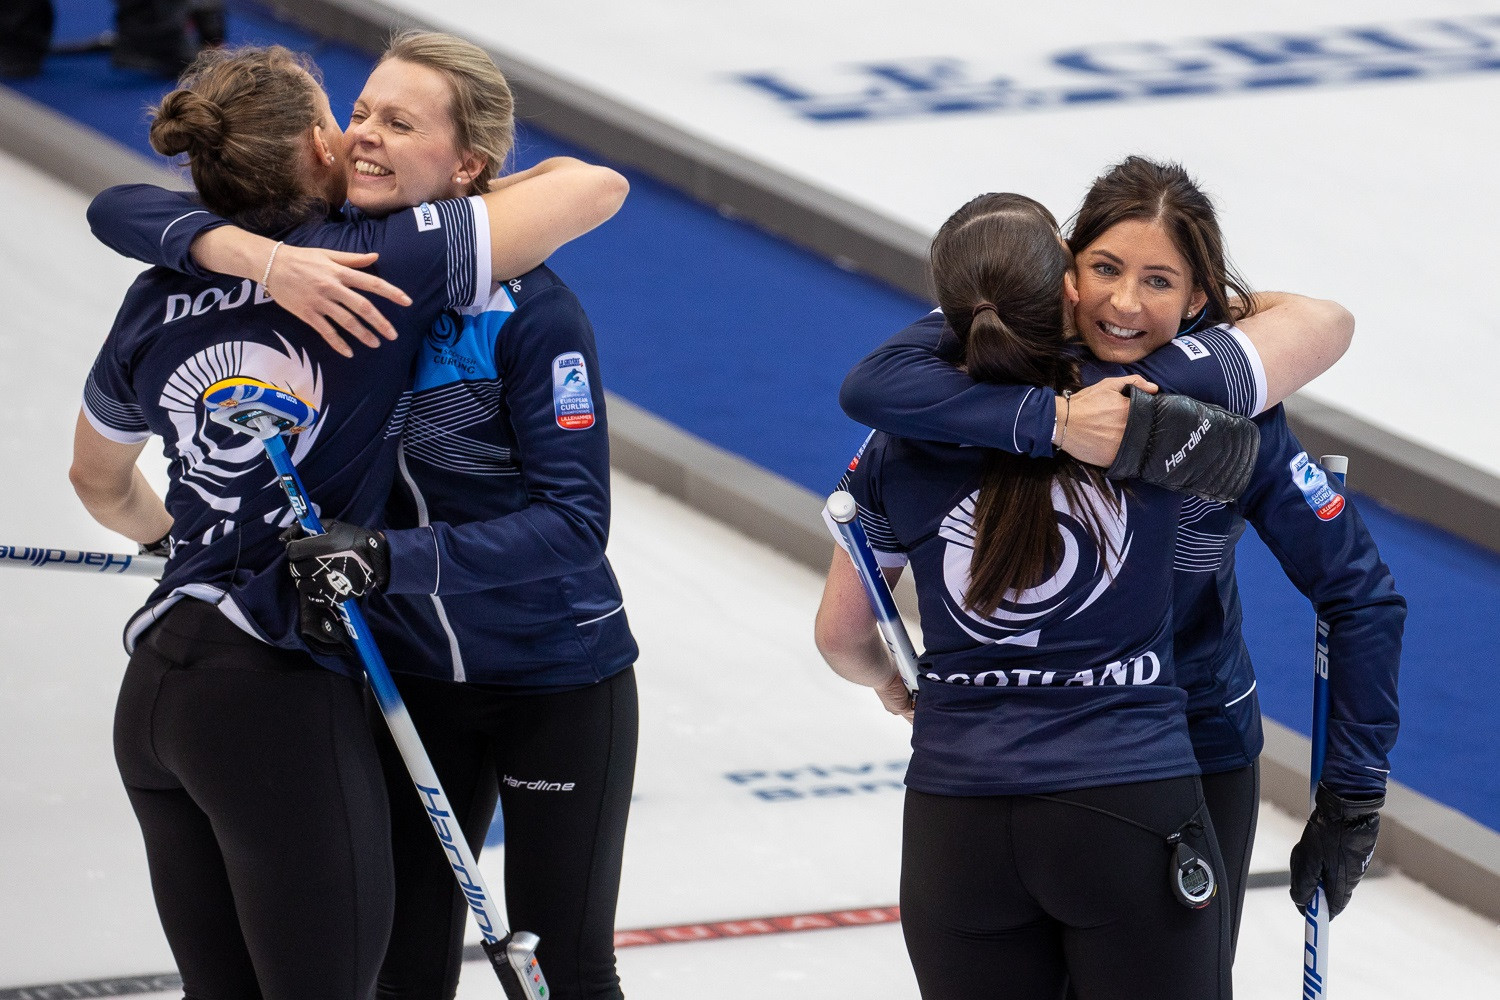 Scotland won the women's and men's titles at the European Curling Championships in Norway ©WCF